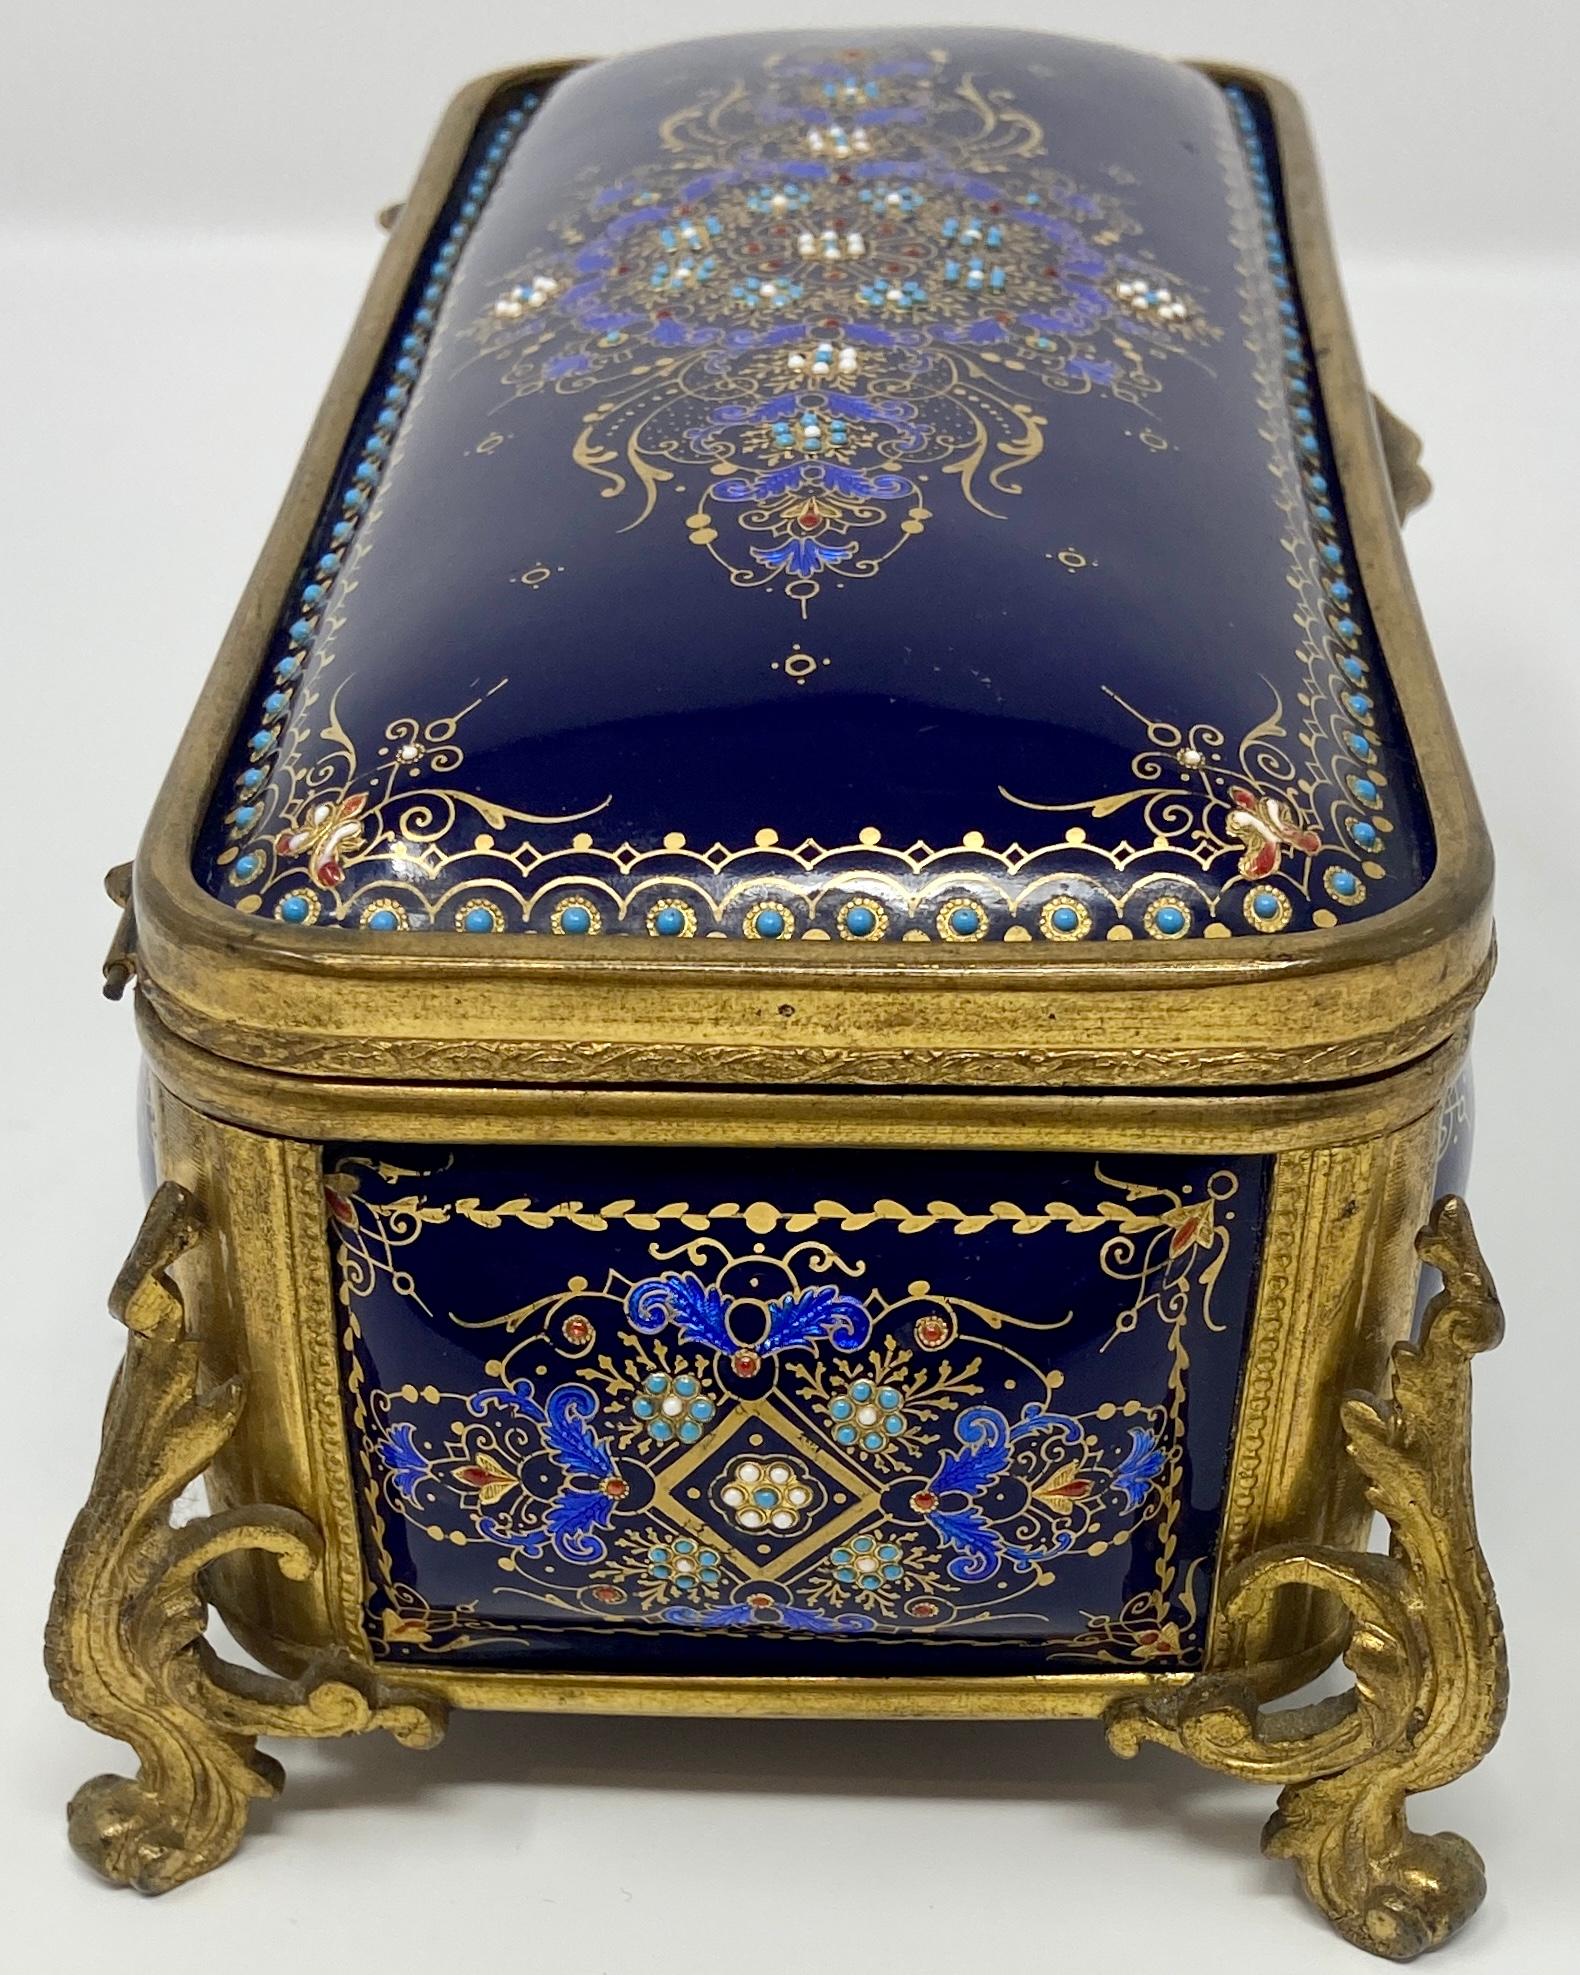 19th Century Antique French Gold Bronze and Blue Enameled Porcelain Jewel Box, Circa 1880s.